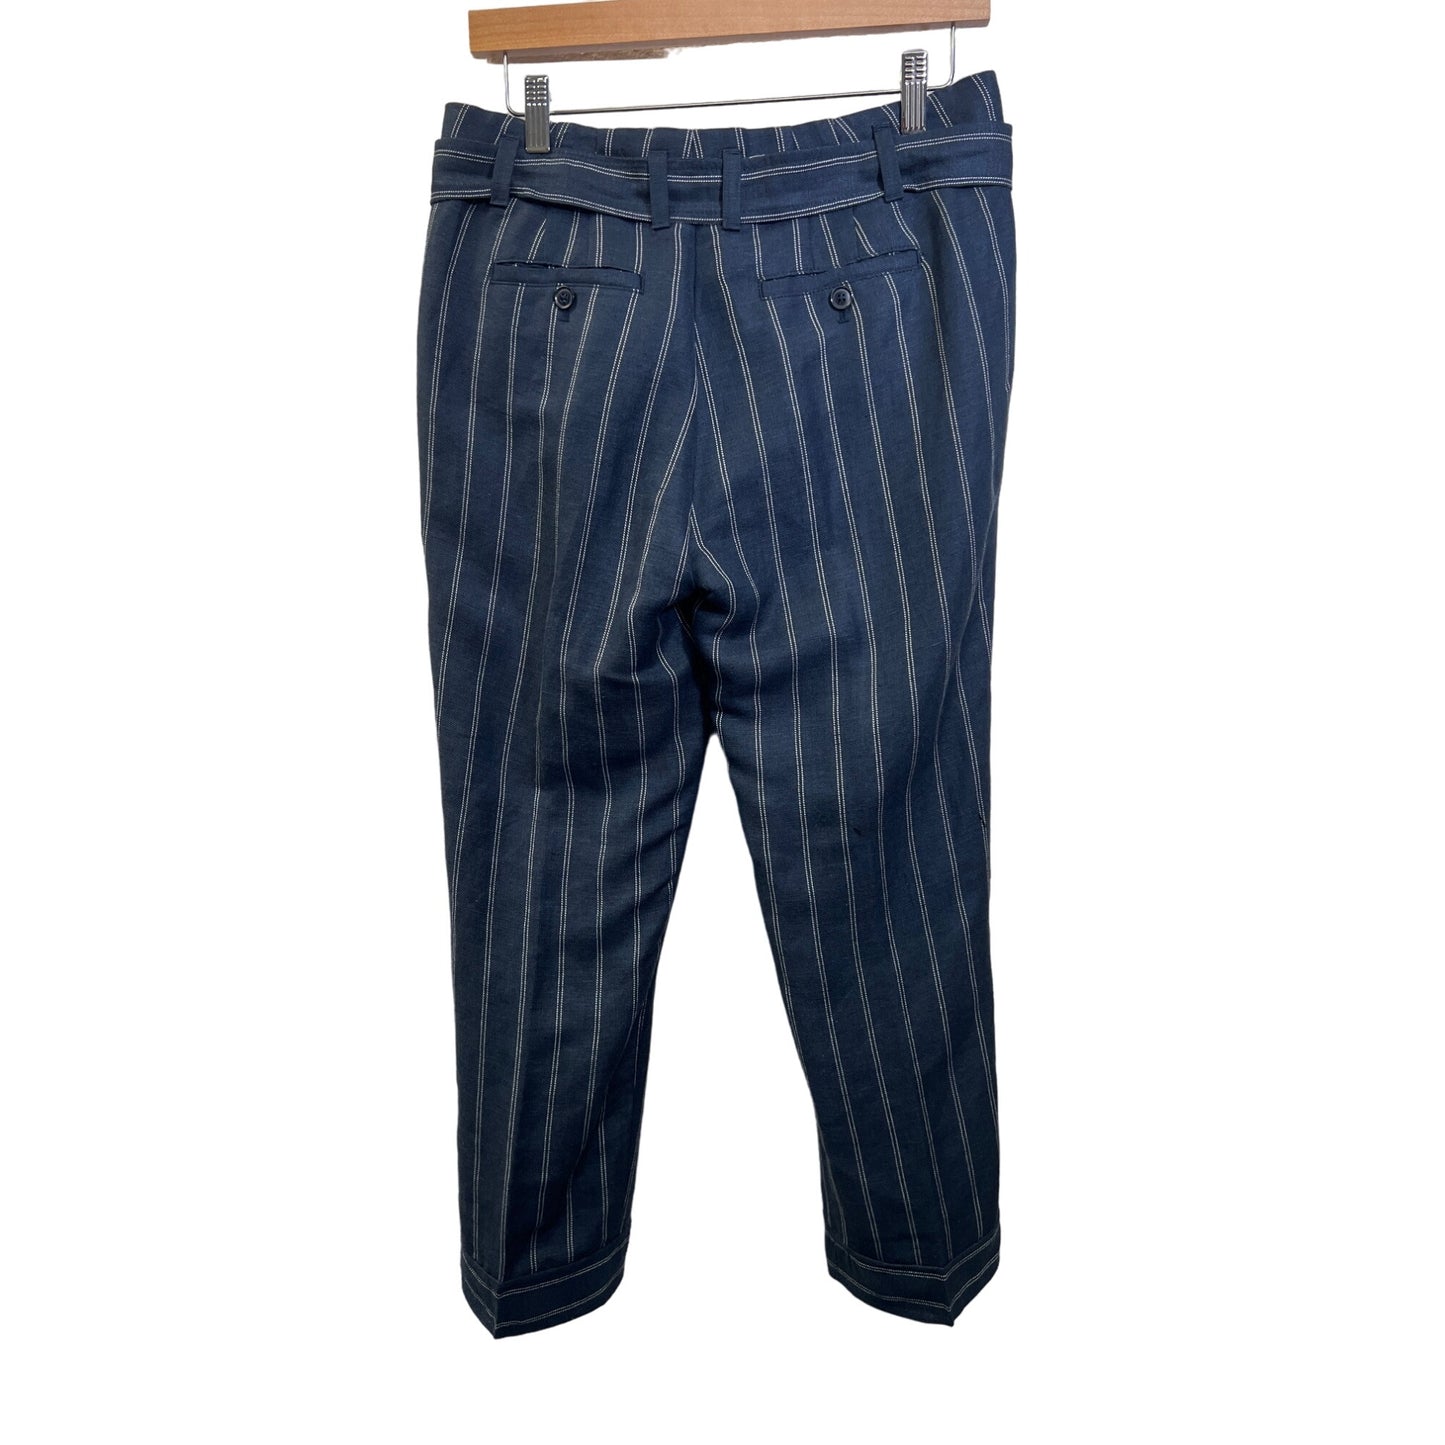 Banana Republic Avery Fit Blue and White Striped Belted Linen Pants